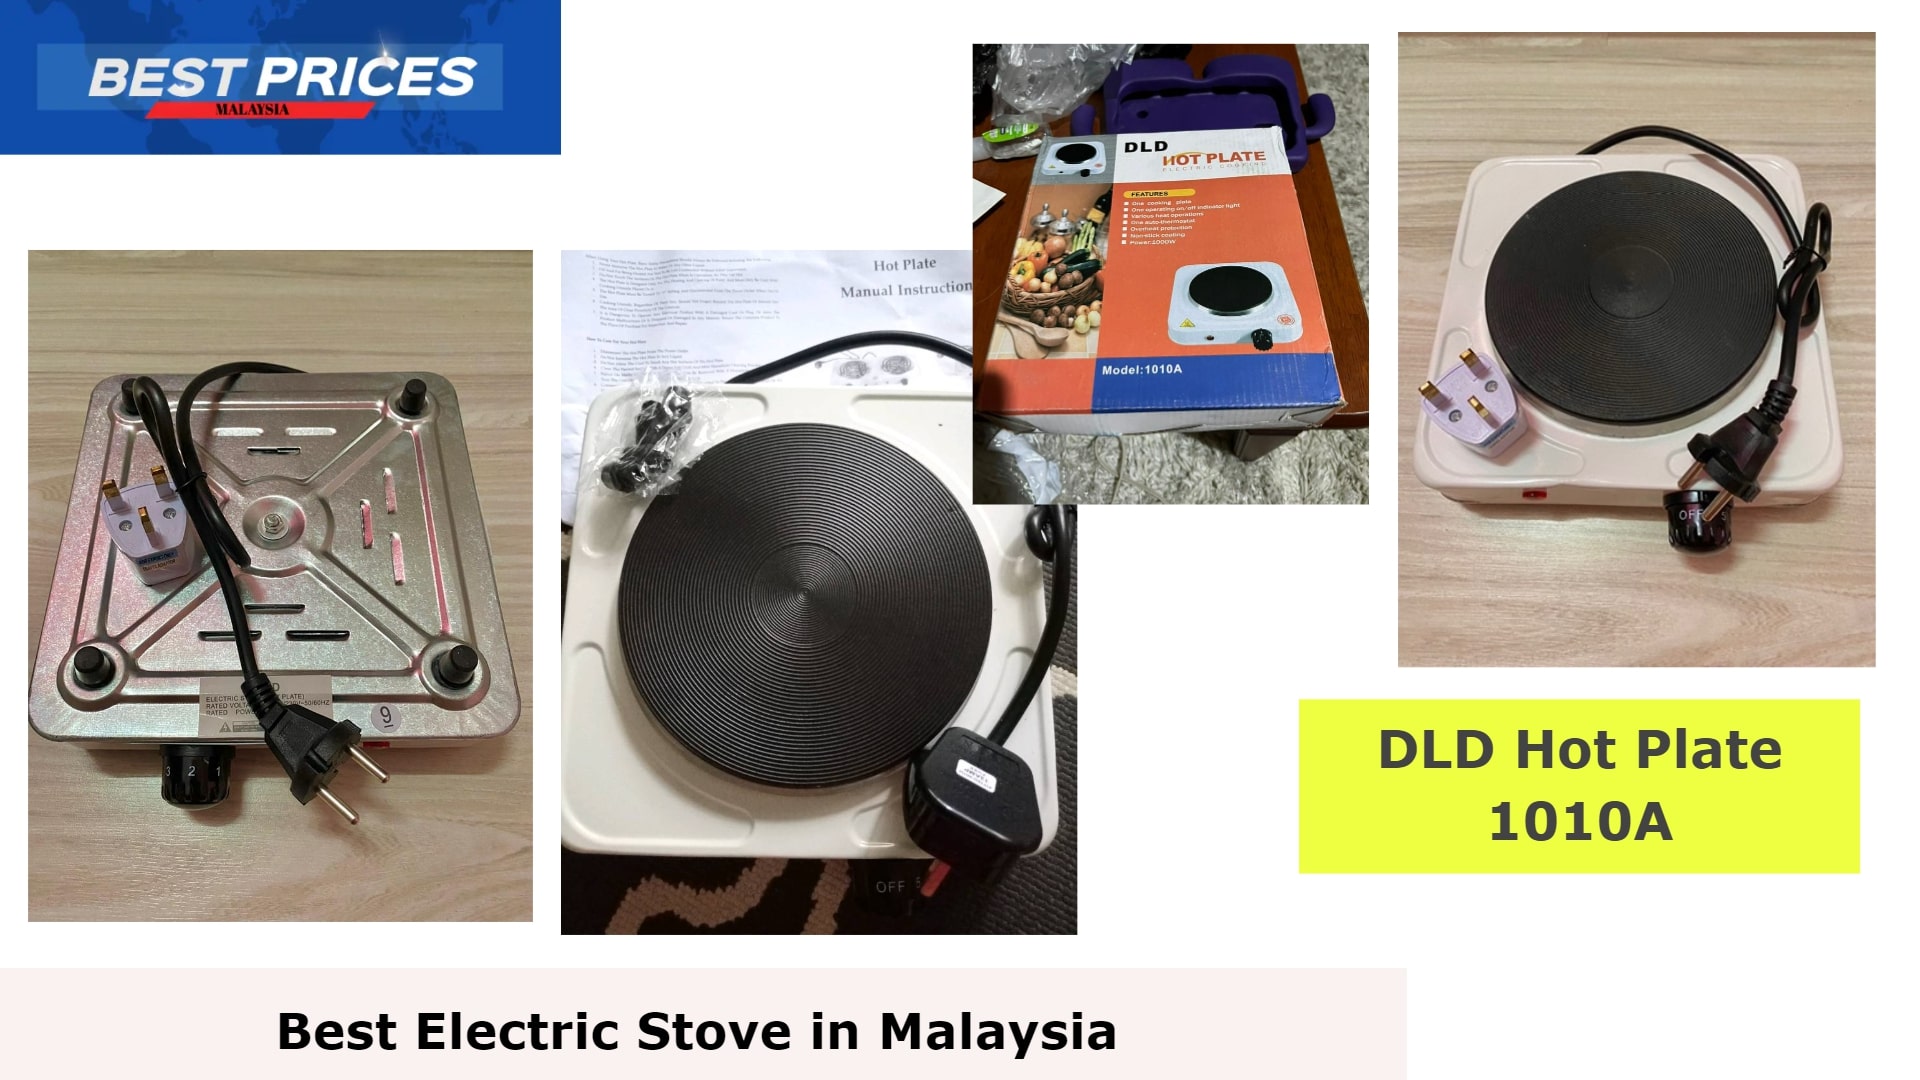 DLD Hot Plate 1010A - Electric Stove Malaysia, Electric Stove Malaysia, Best Electric Stove Malaysia, hich electric stove is best in Malaysia?, Which is the best electric stove?, Which is better electric stove or gas stove?, How much do electric stoves cost?, electric stove malaysia review, 
rubine electric stove, electric stove ceramic, built-in electric stove malaysia, 
portable electric stove, electric stove vs induction cooker, electric stove electrolux, 
electric stove vs gas stove malaysia,